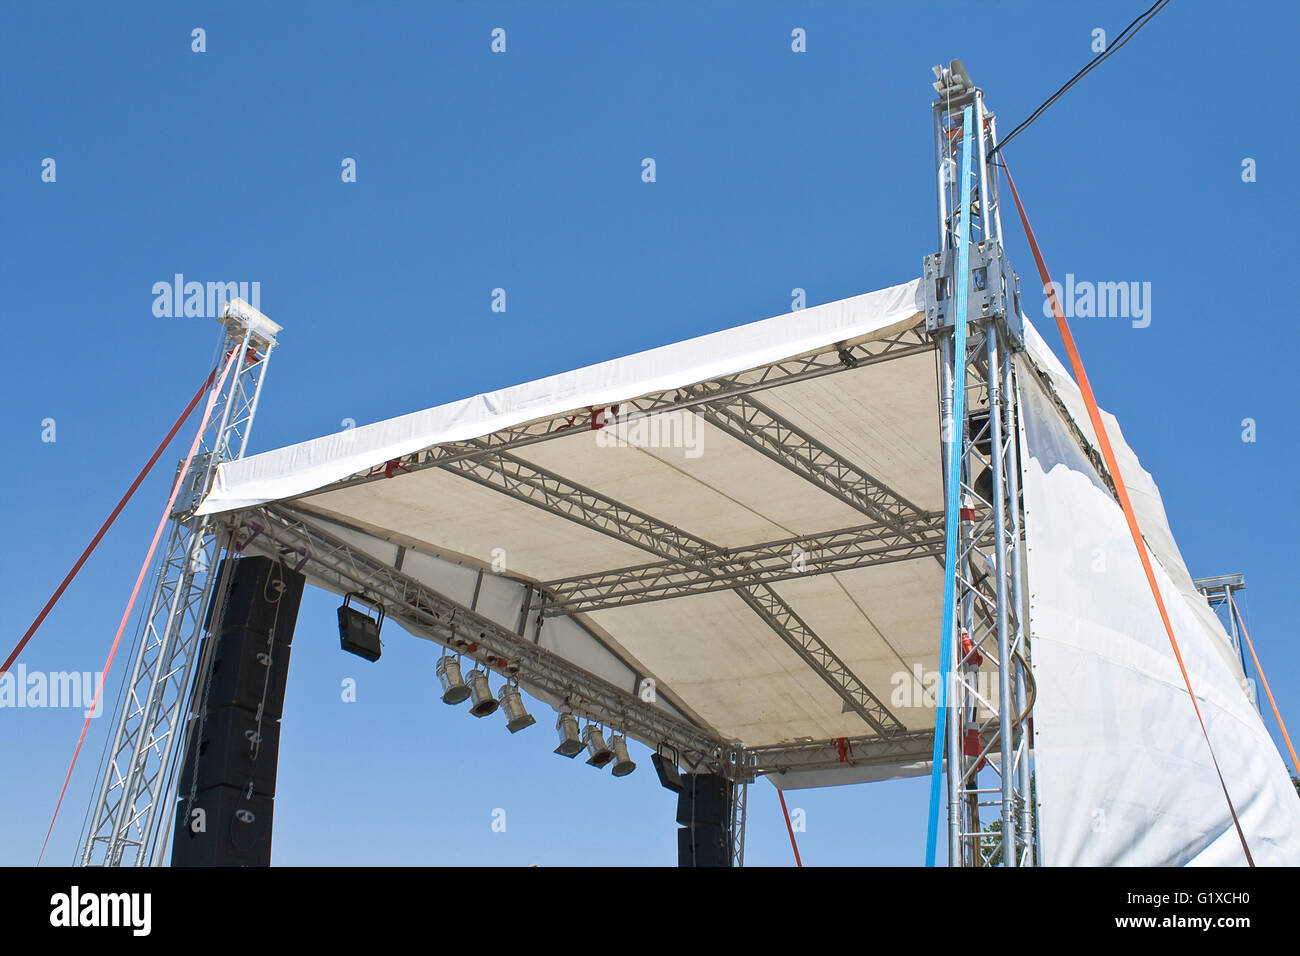 Outdoor concert stage construction over blue sky Stock Photo